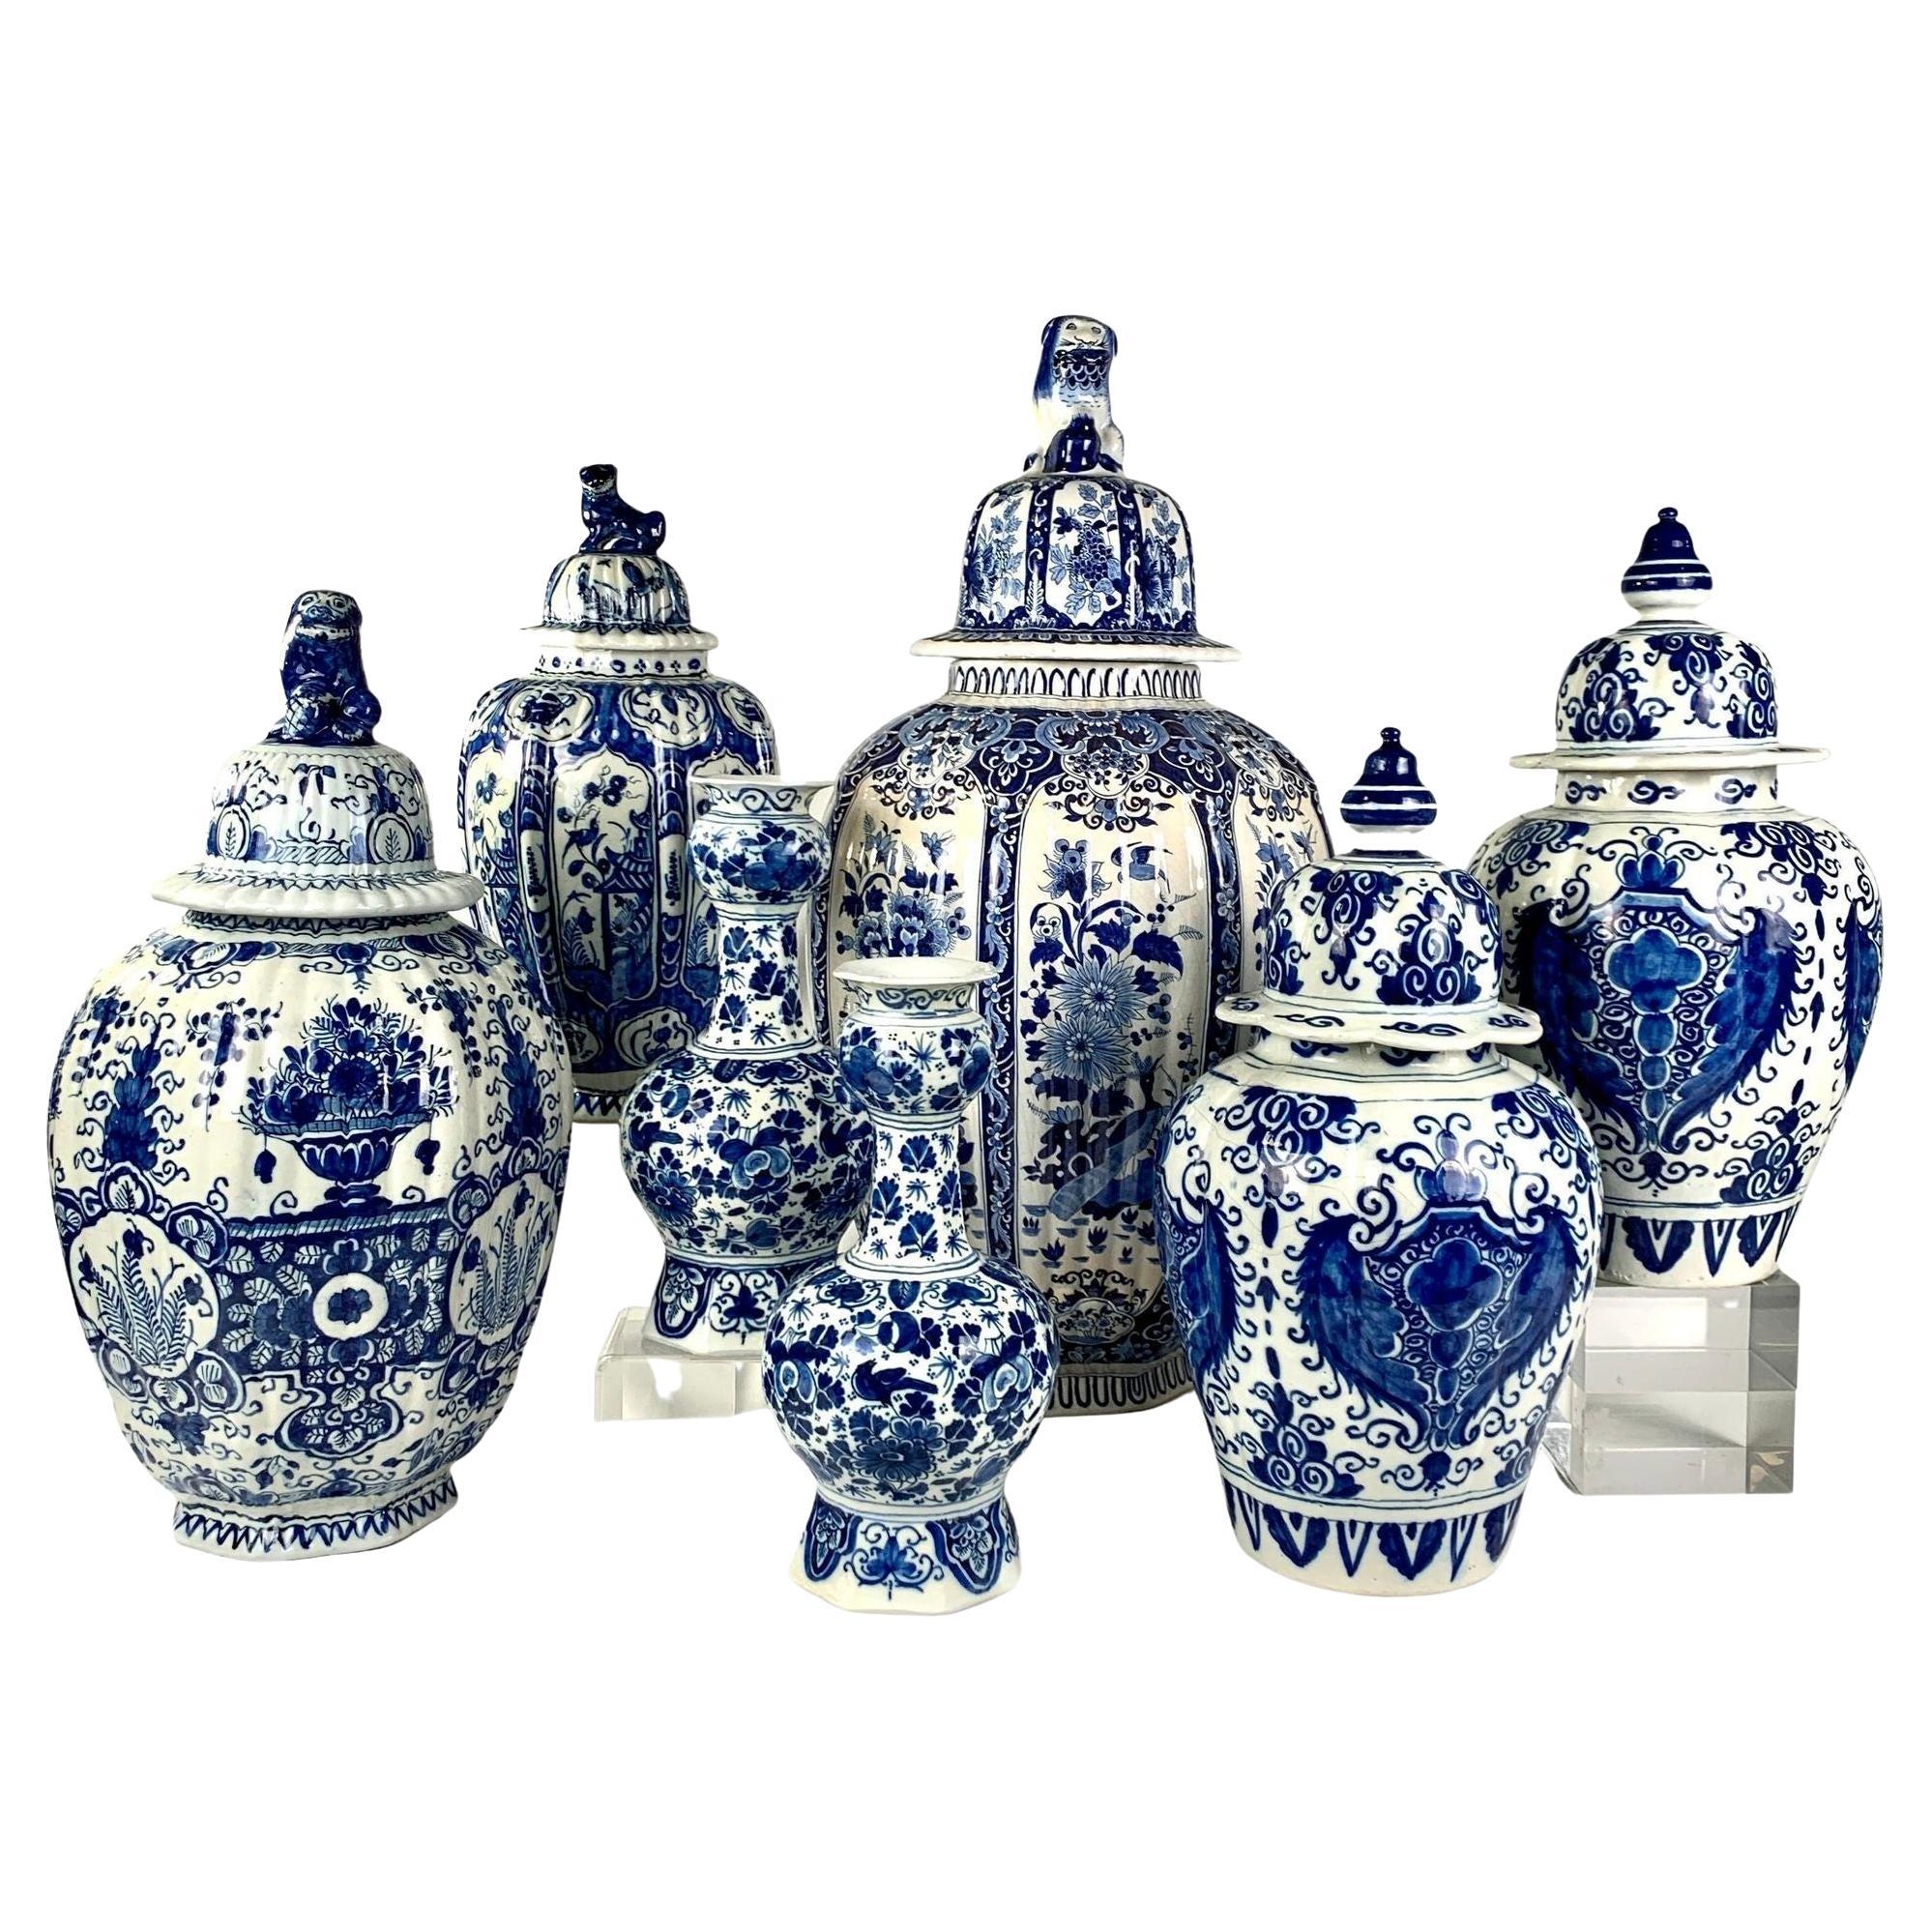 Blue and White Delft Jars and Vases Antique Grouping 18th-19th Centuries